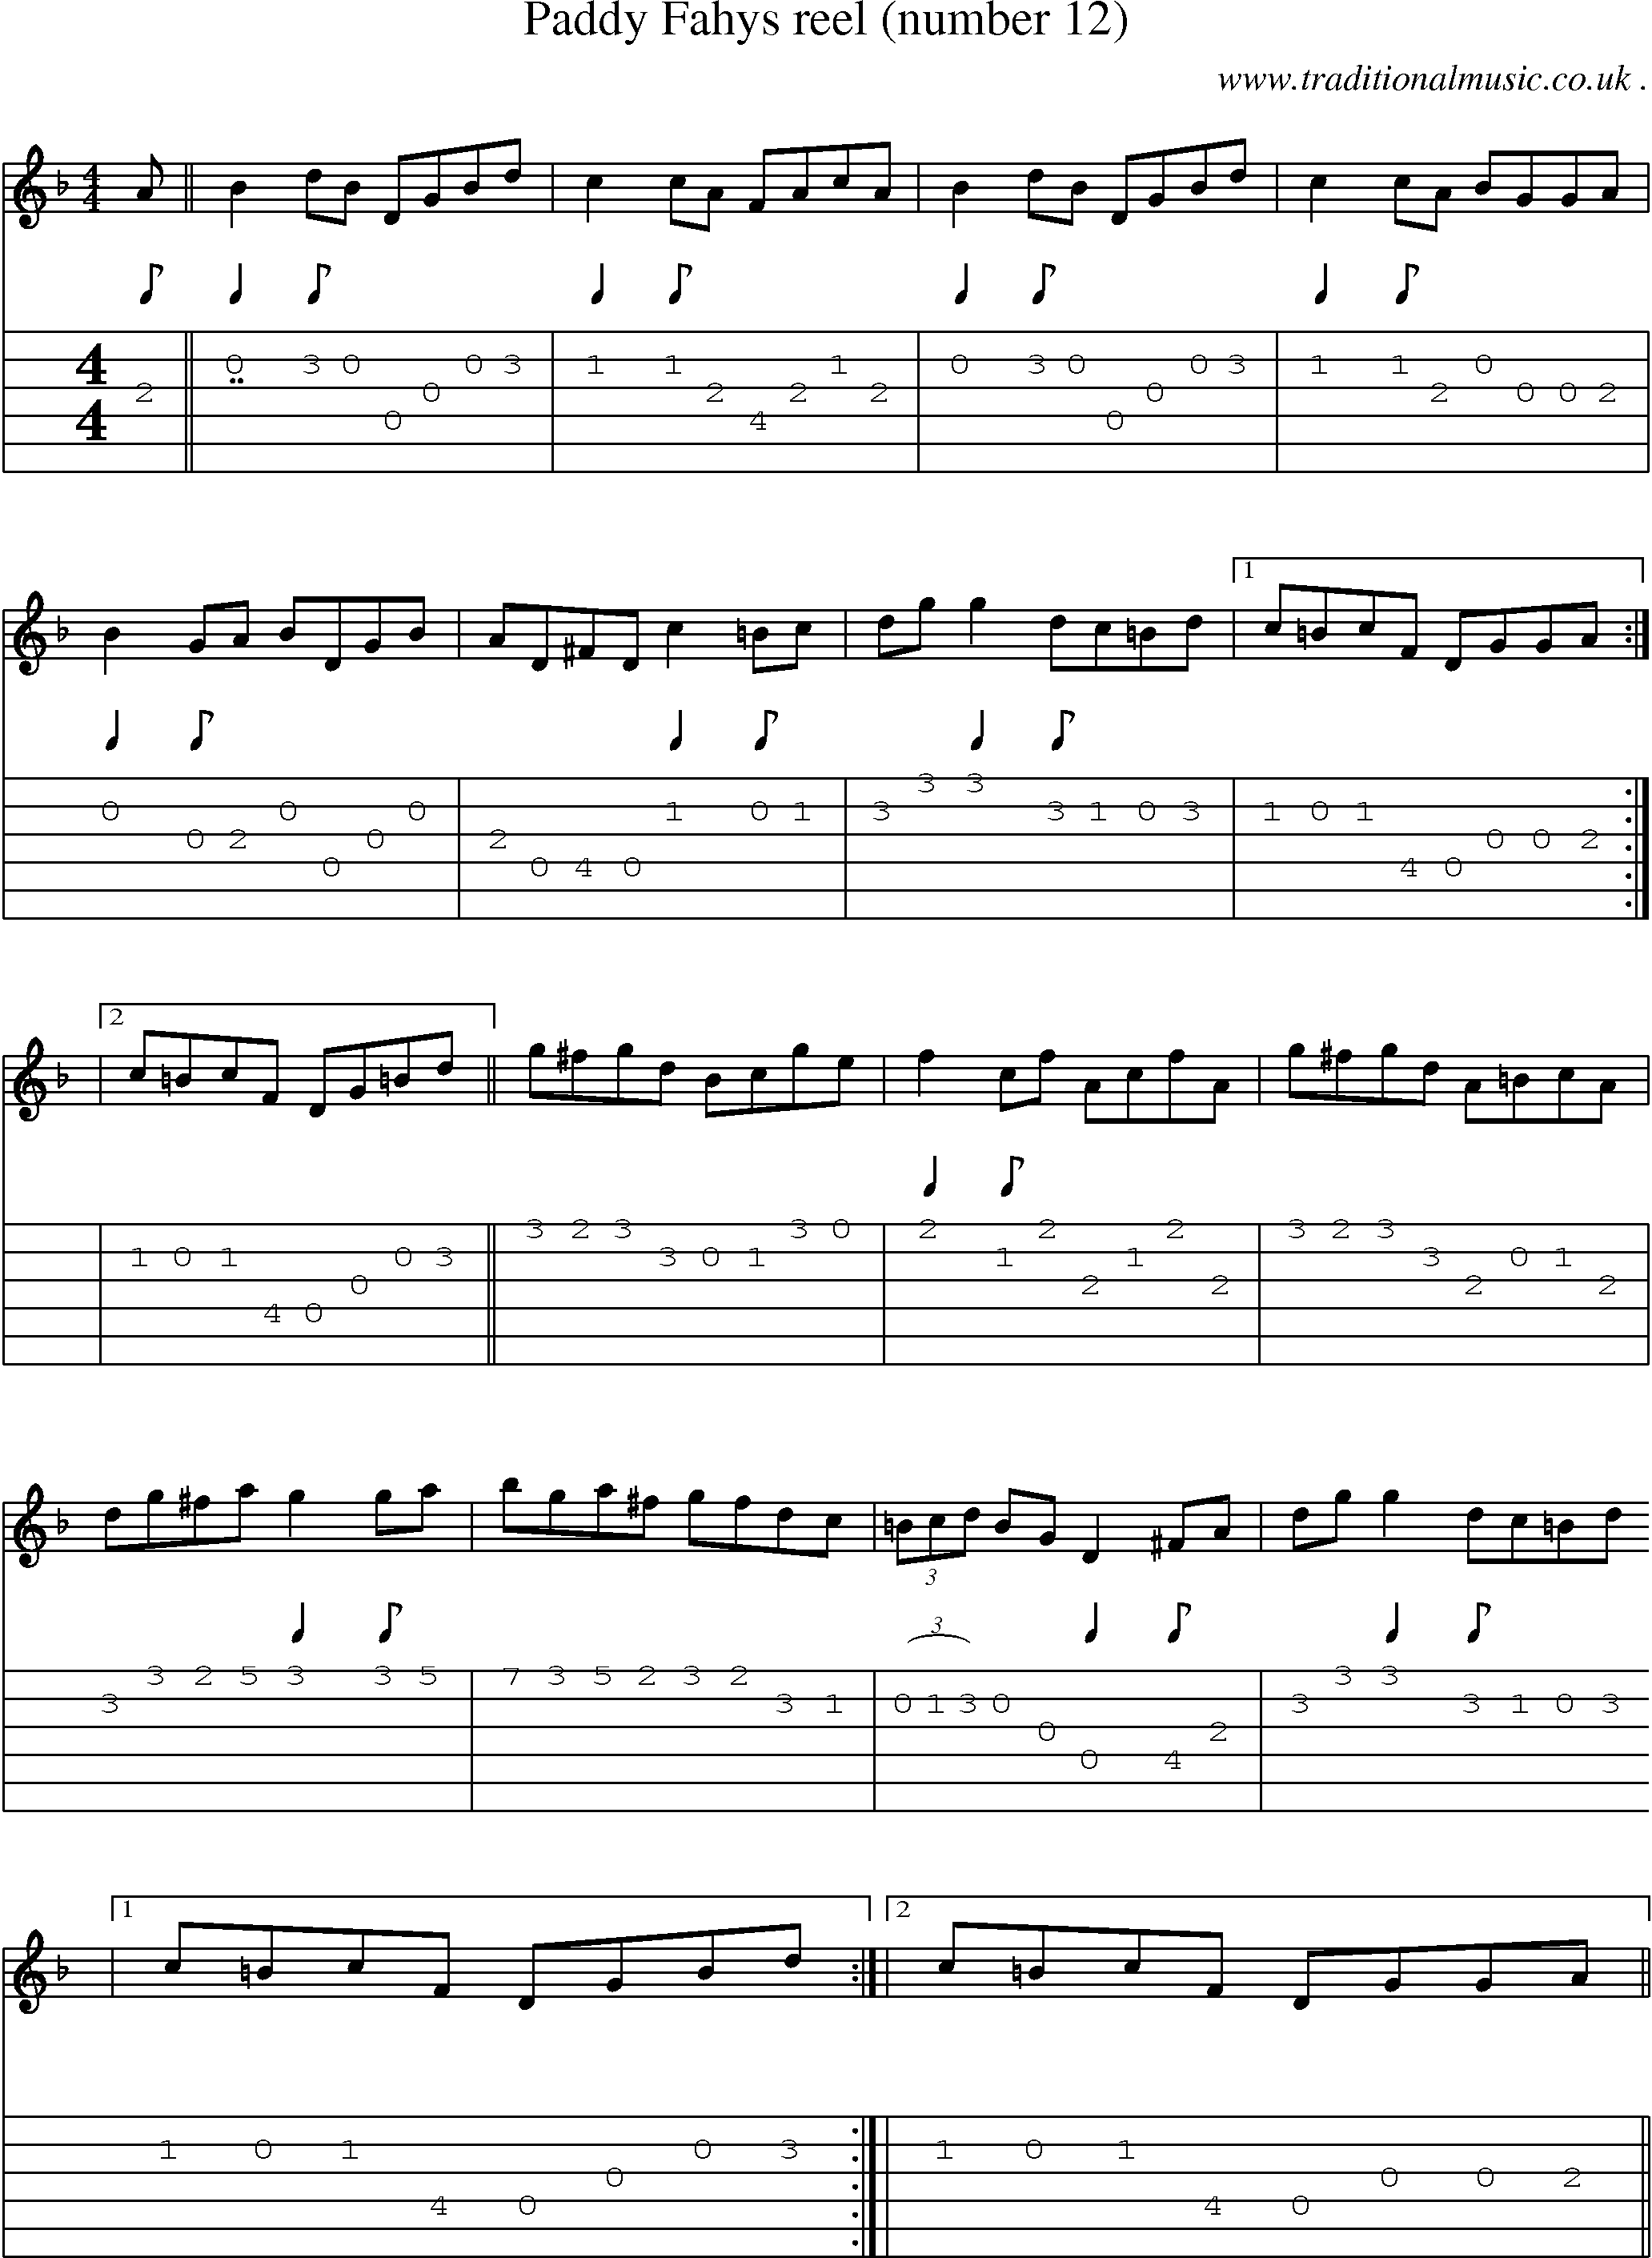 Sheet-Music and Guitar Tabs for Paddy Fahys Reel (number 12)